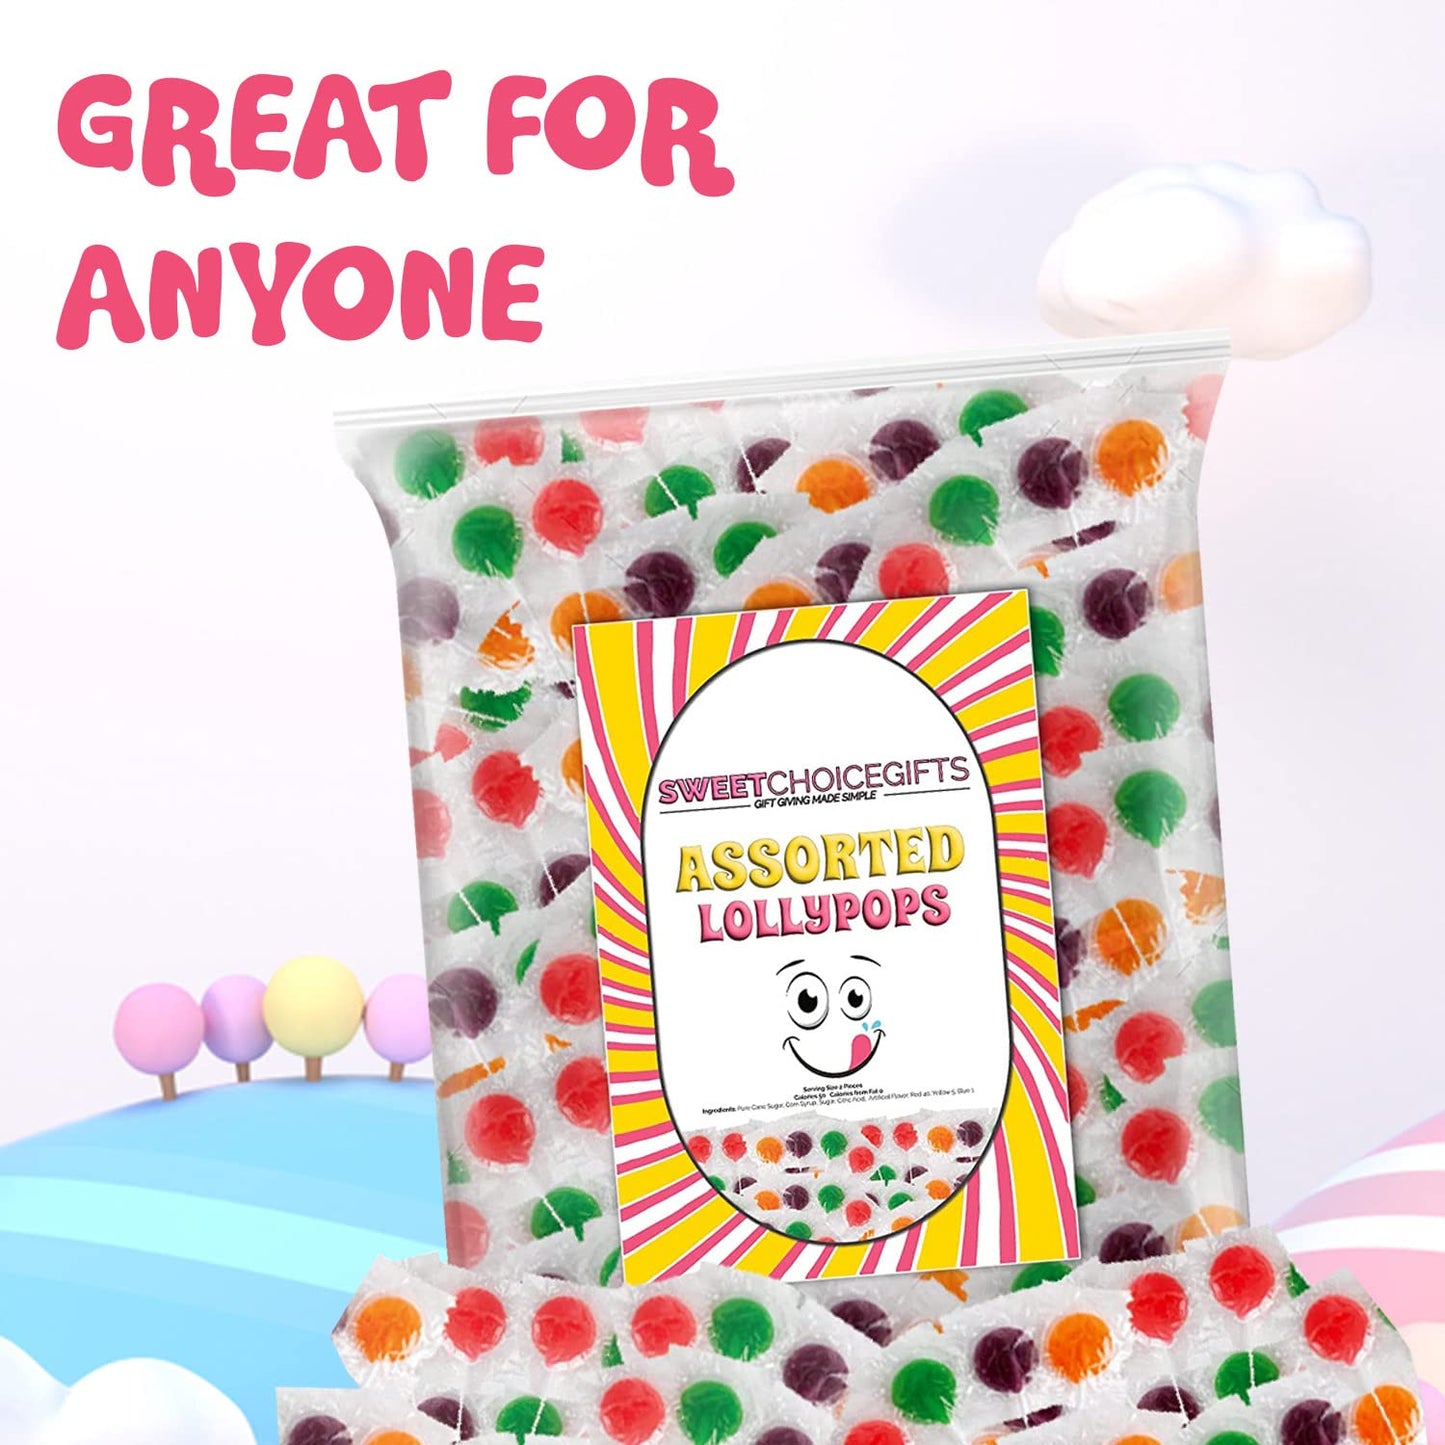 Lollipops - Classic Lollipops - Candy Suckers - Assorted Flavors - Bulk Candy - 2.5 LB Great For offices schools Pinata Stuffers - Bulk Candy - Assorted Candy - Individually Wrapped Candy - Party Mix - Candy Assortment